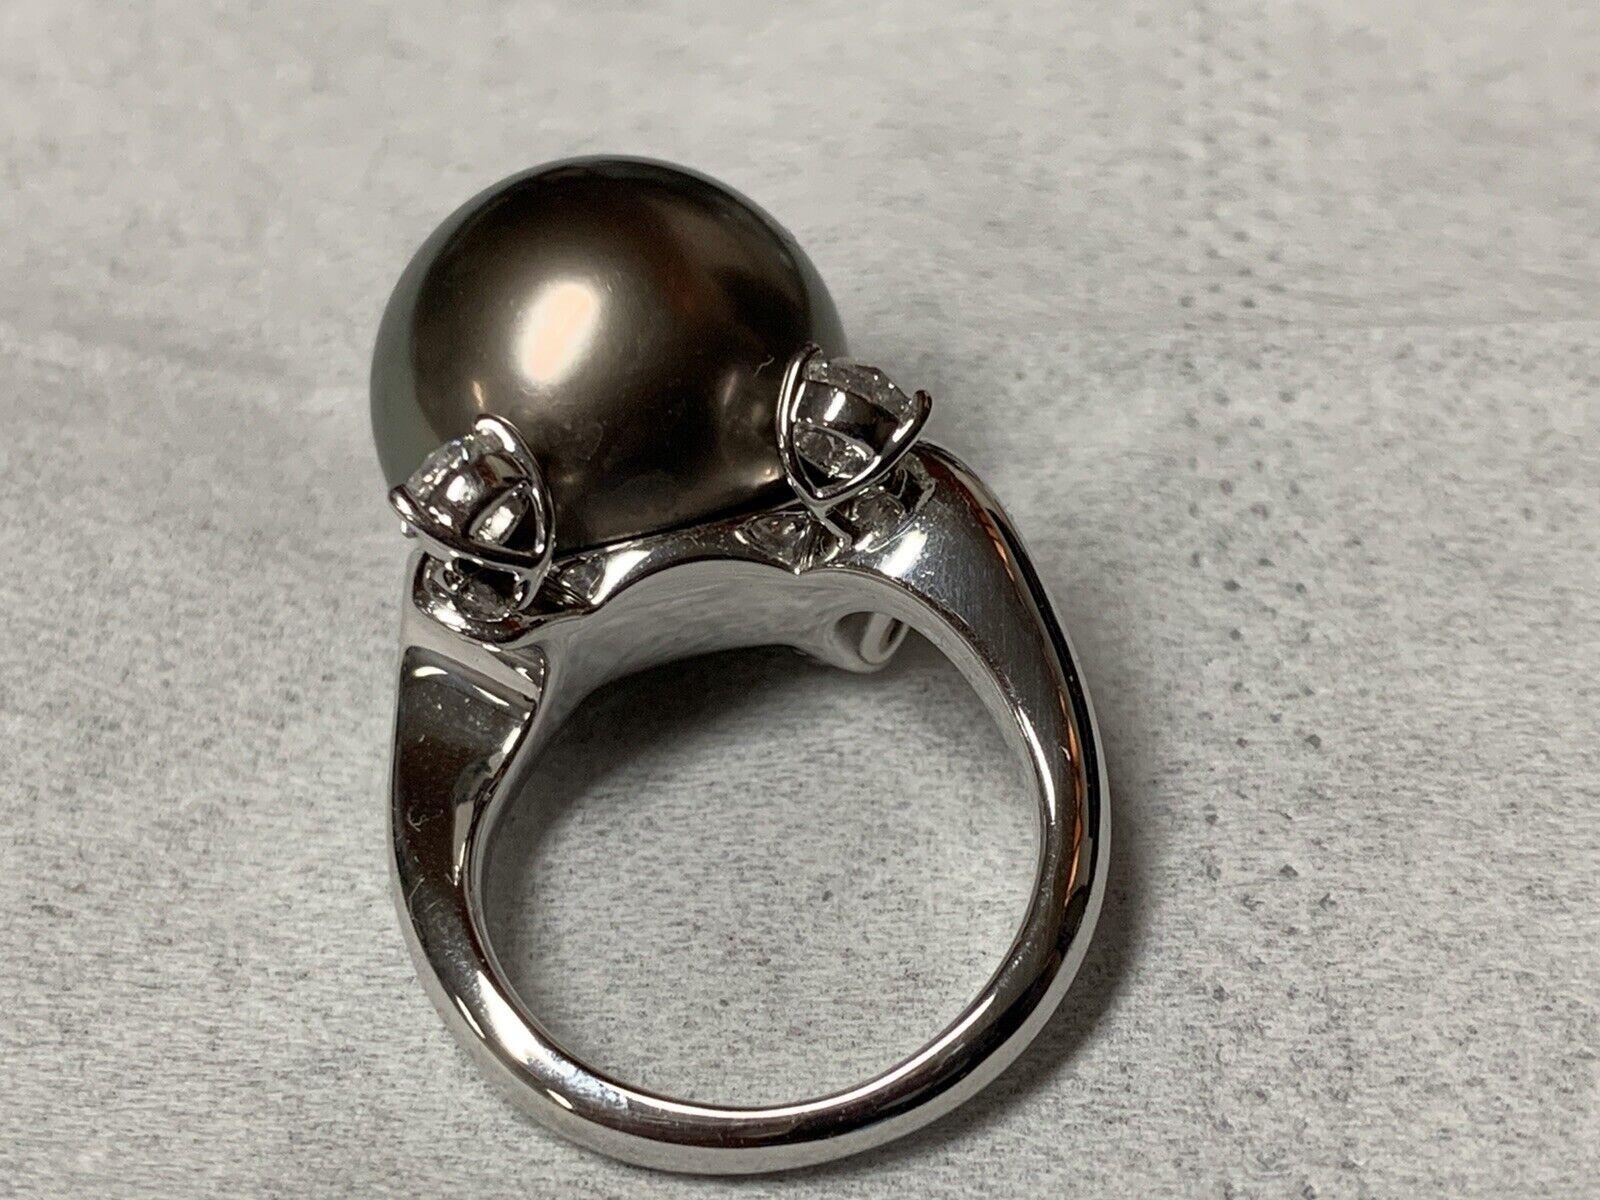 MIKIMOTO black pearl ring, made in white gold 18k. with 4 diamonds (0.28 ct)

Pesrl diameter: 15.6 mm.

Item weight: 15.03 grams

Ring size: US 6, 16 mm